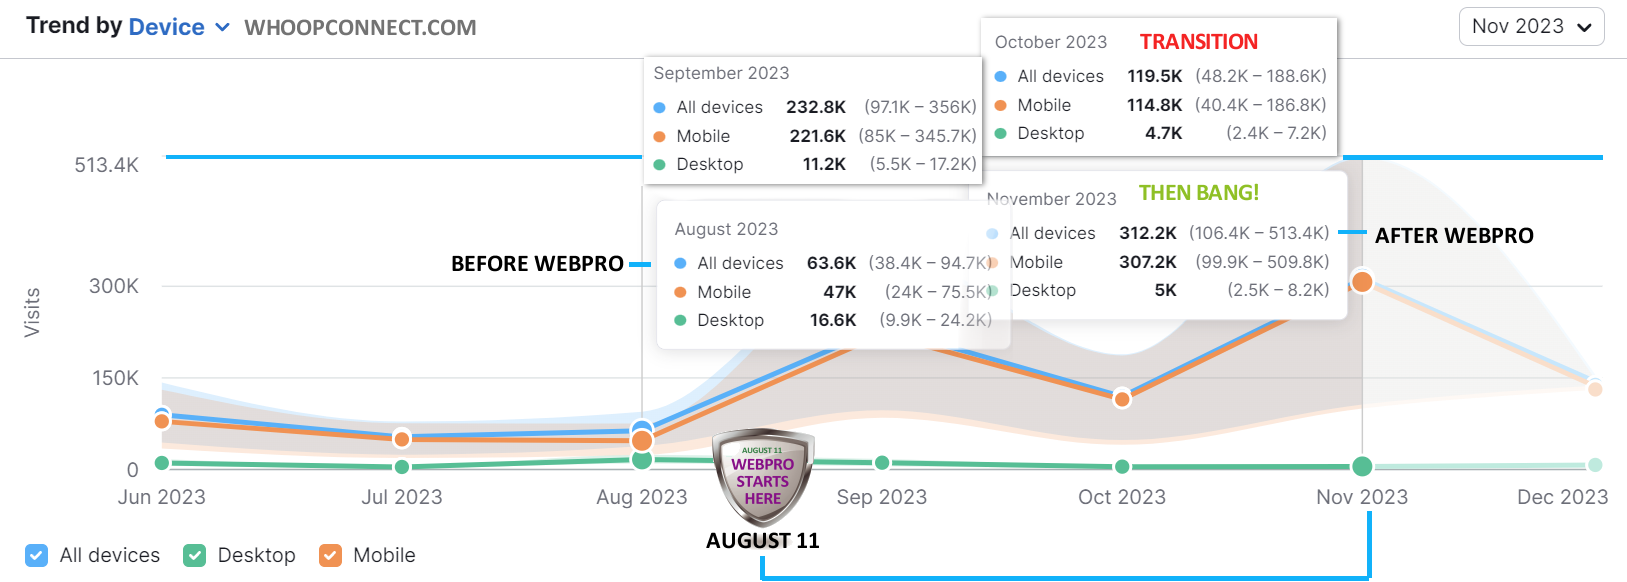 WhoopConnect Domain Marketing Trends Chart